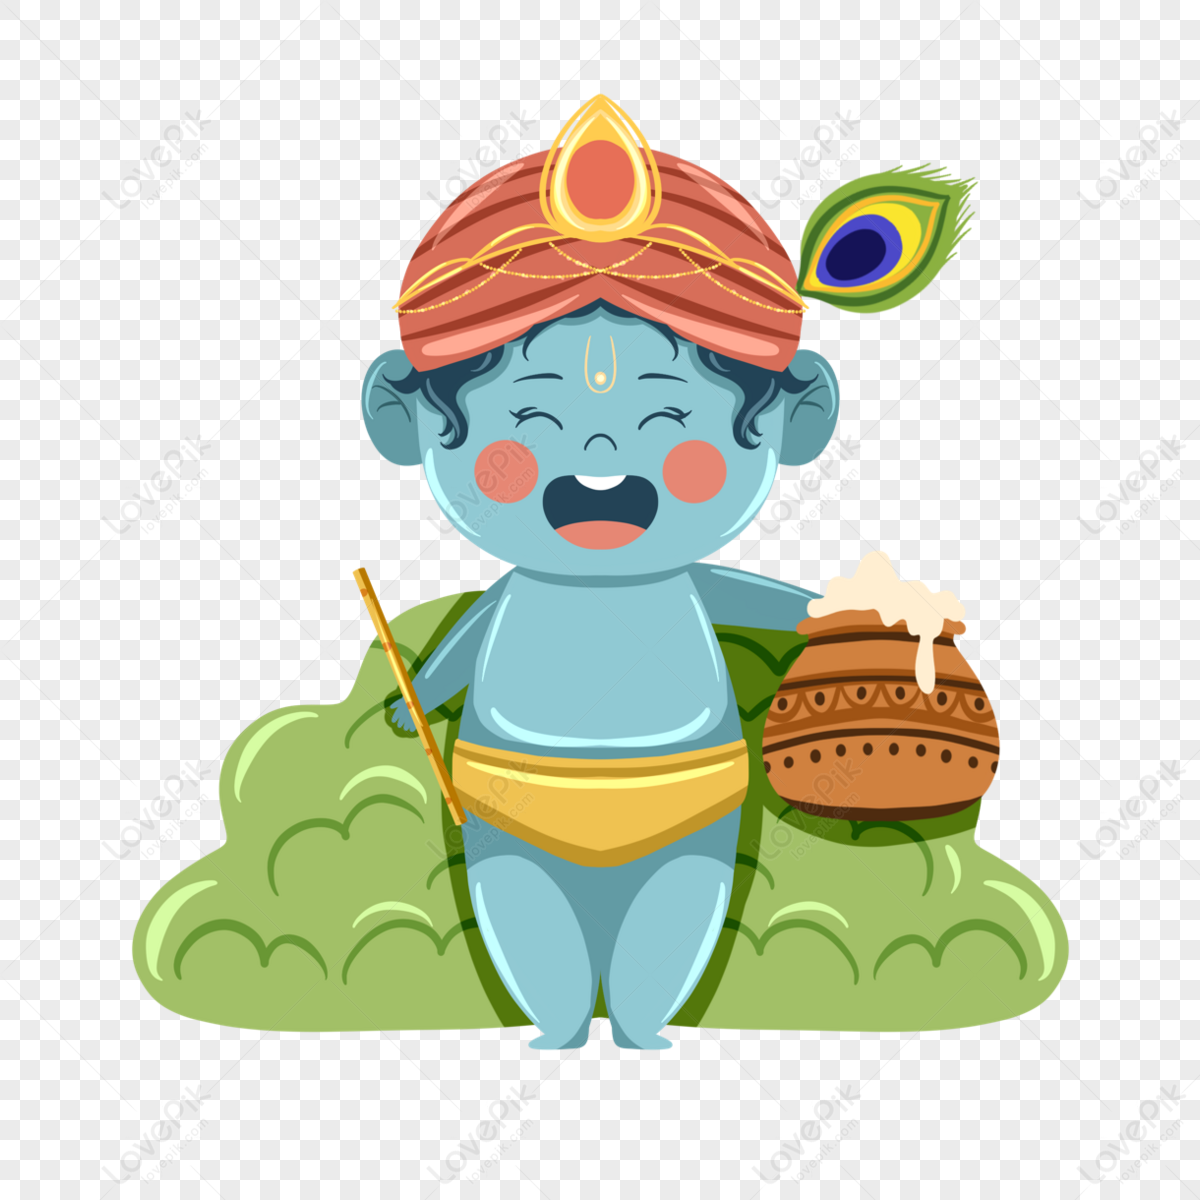 Happy Janmashtami. Vector Logo Design. Usable As Background, Banner,  Greeting Card, T-shirt, Print. - Stock Image - Everypixel